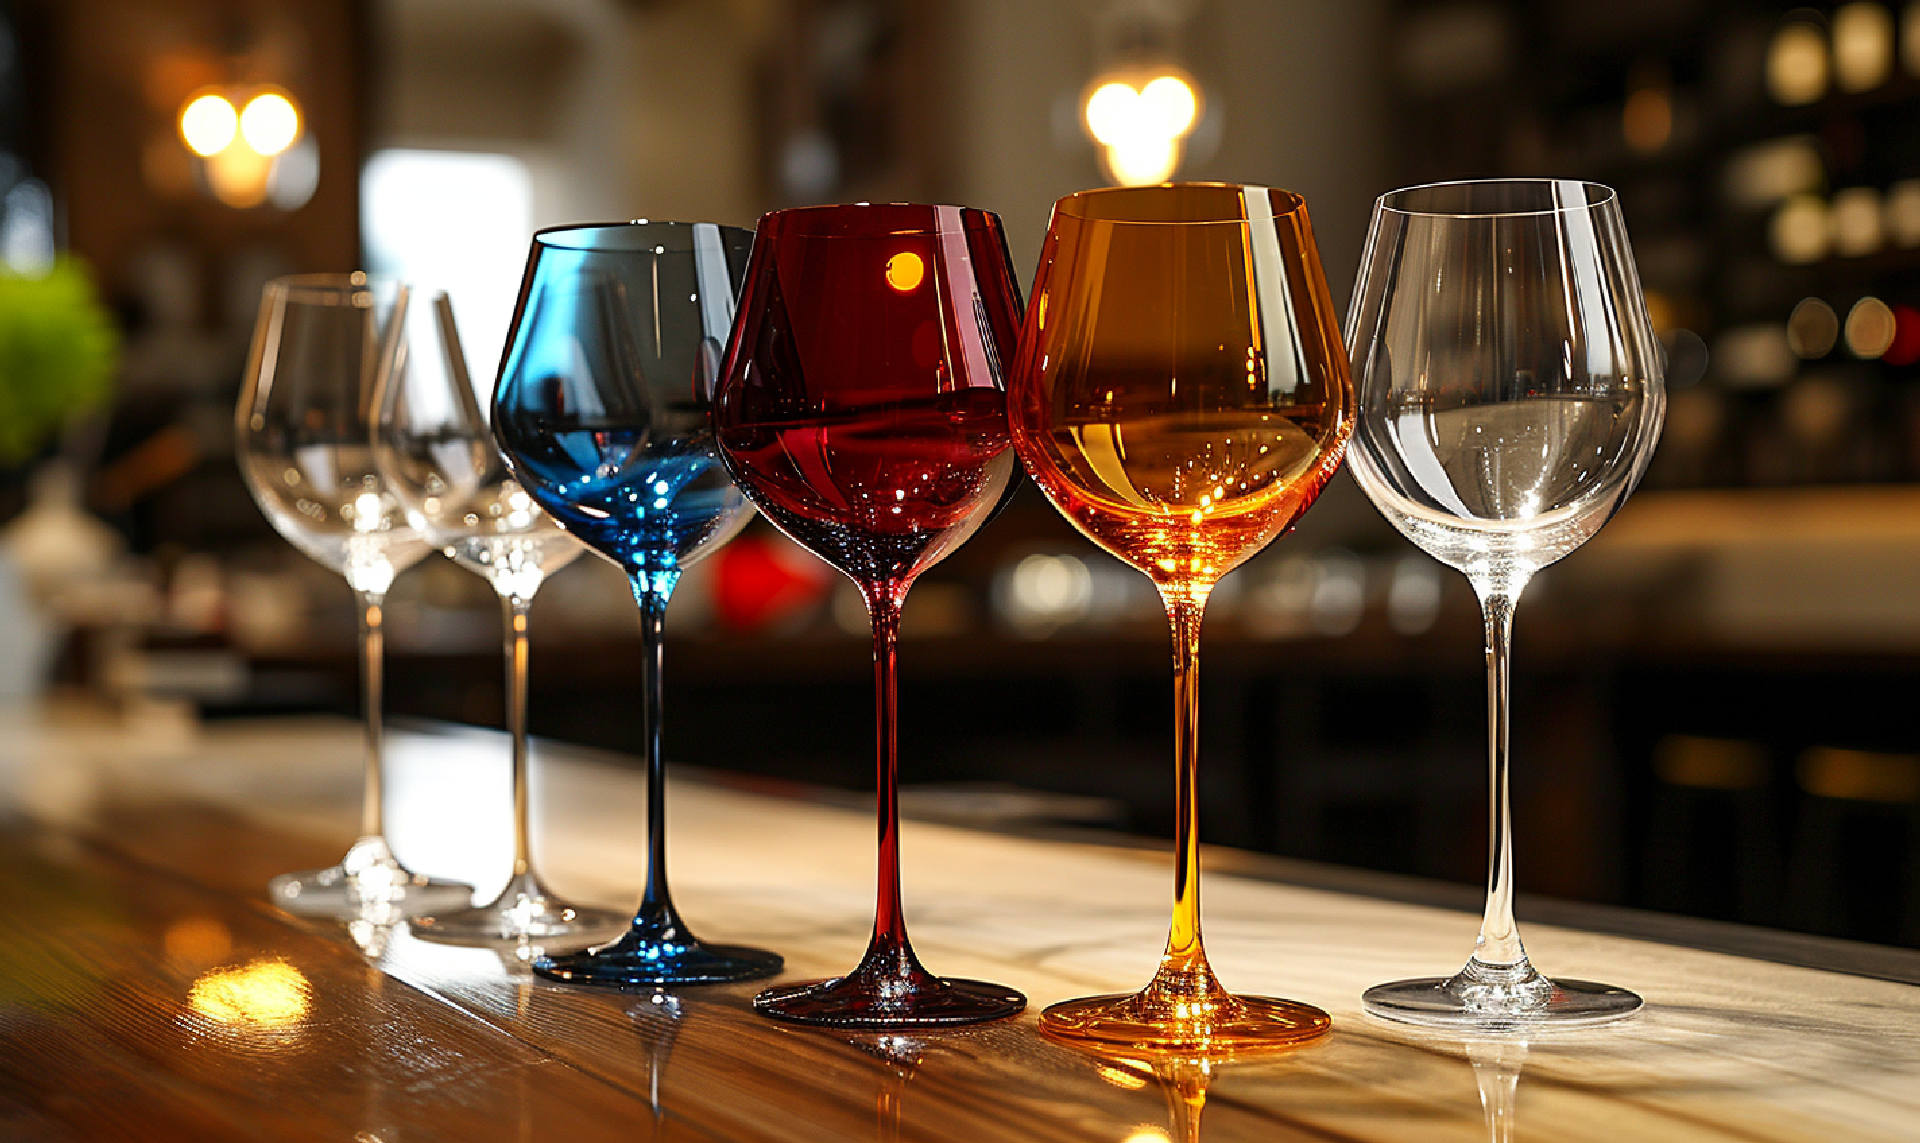 Intricately designed wine glasses showcasing the Artistry of Wine Glasses, reflecting elegance and functionality